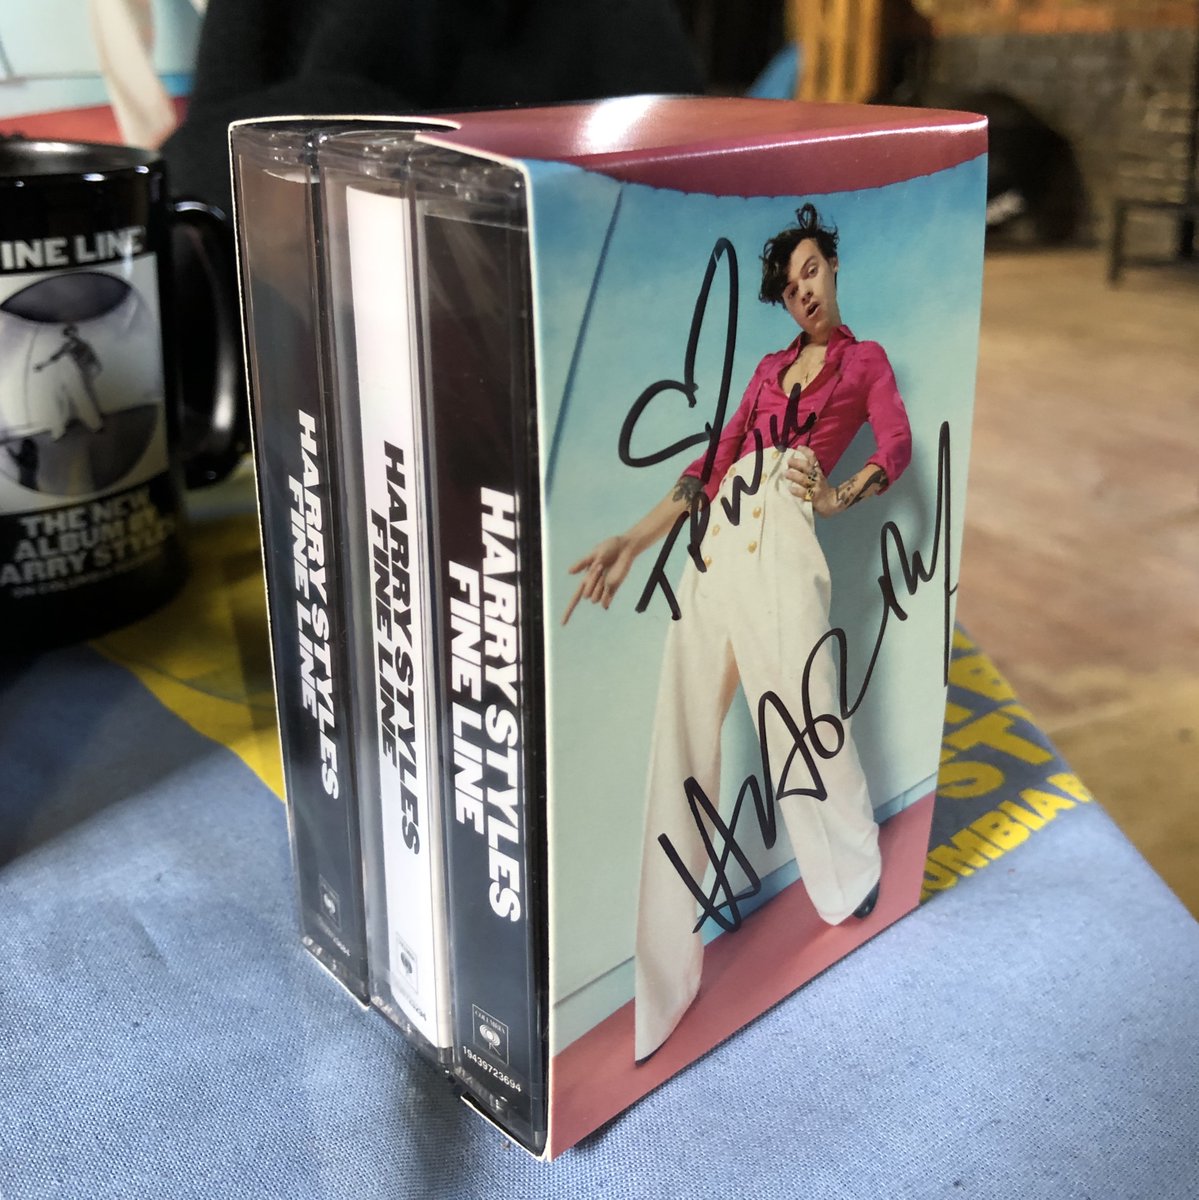 Fine Line. The cassette collection signed by Harry.
 
Available now at the London Pop-Up Shop. Open until 8PM today and 11AM-6PM tomorrow. NW1 8AH.